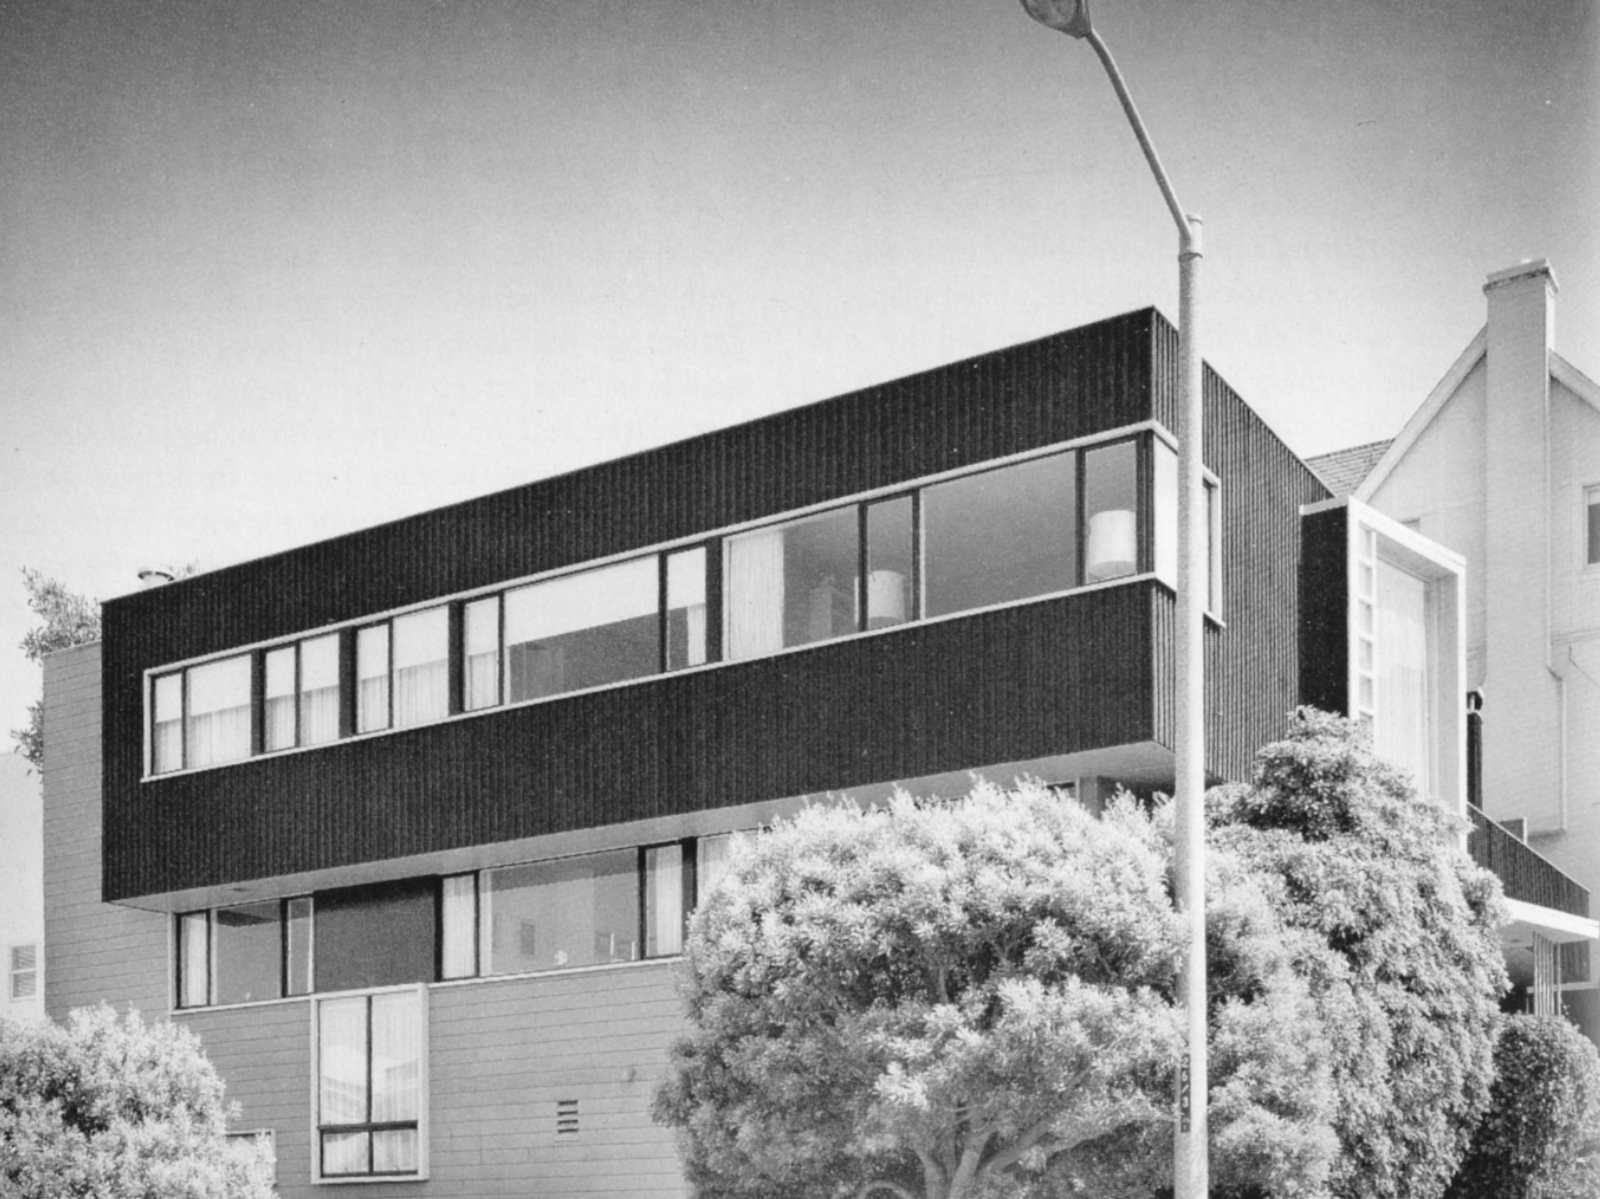 The Mid-Century Modern House Style Explained